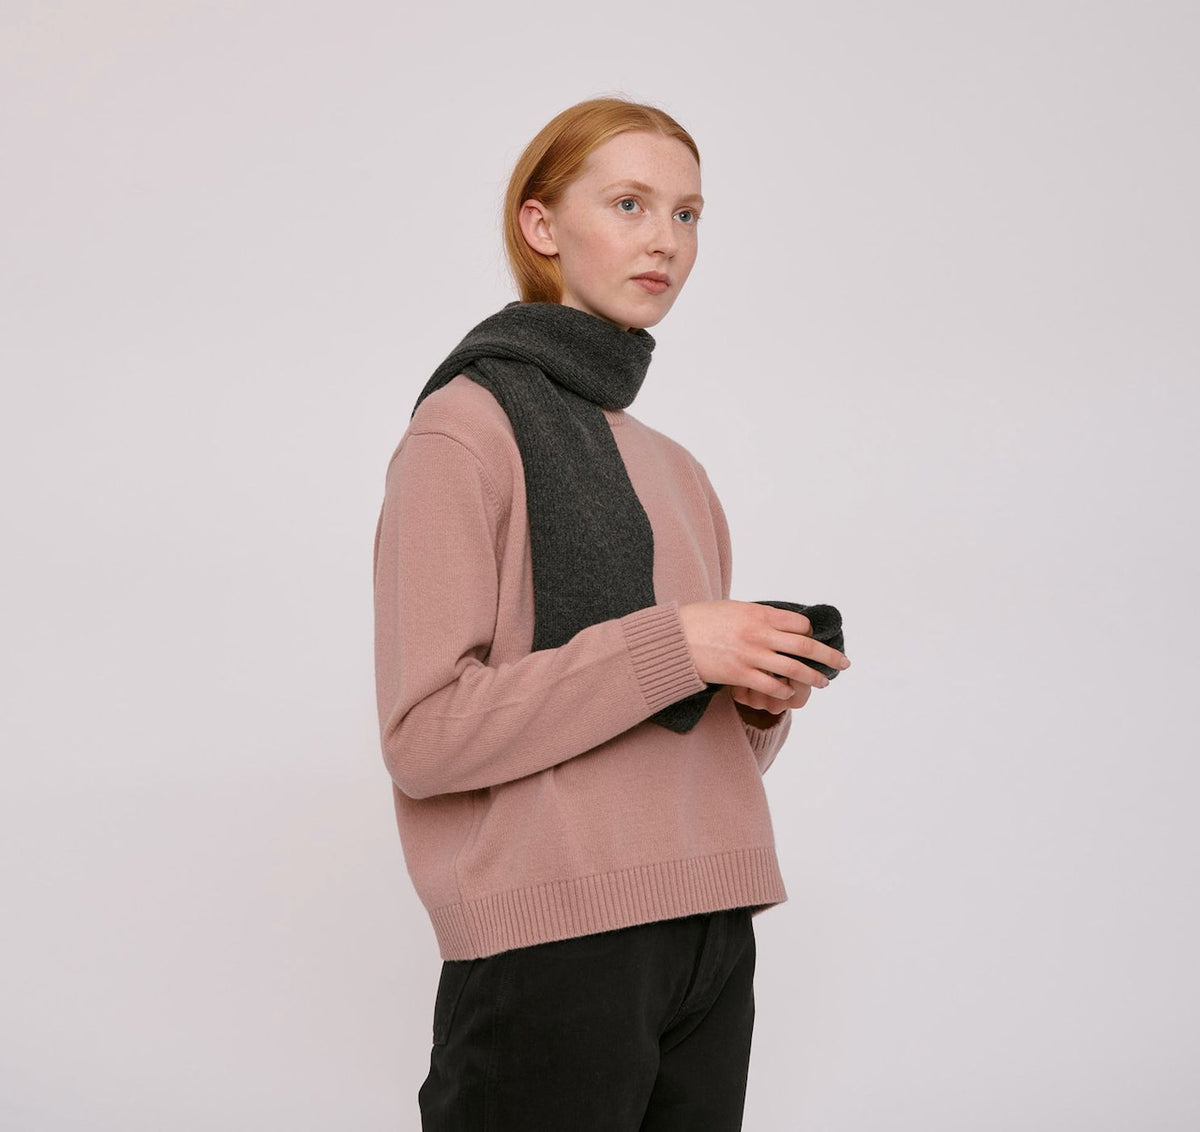 The model is wearing a Recycled Wool Scarf – Charcoal Melange by Organic Basics and black pants.